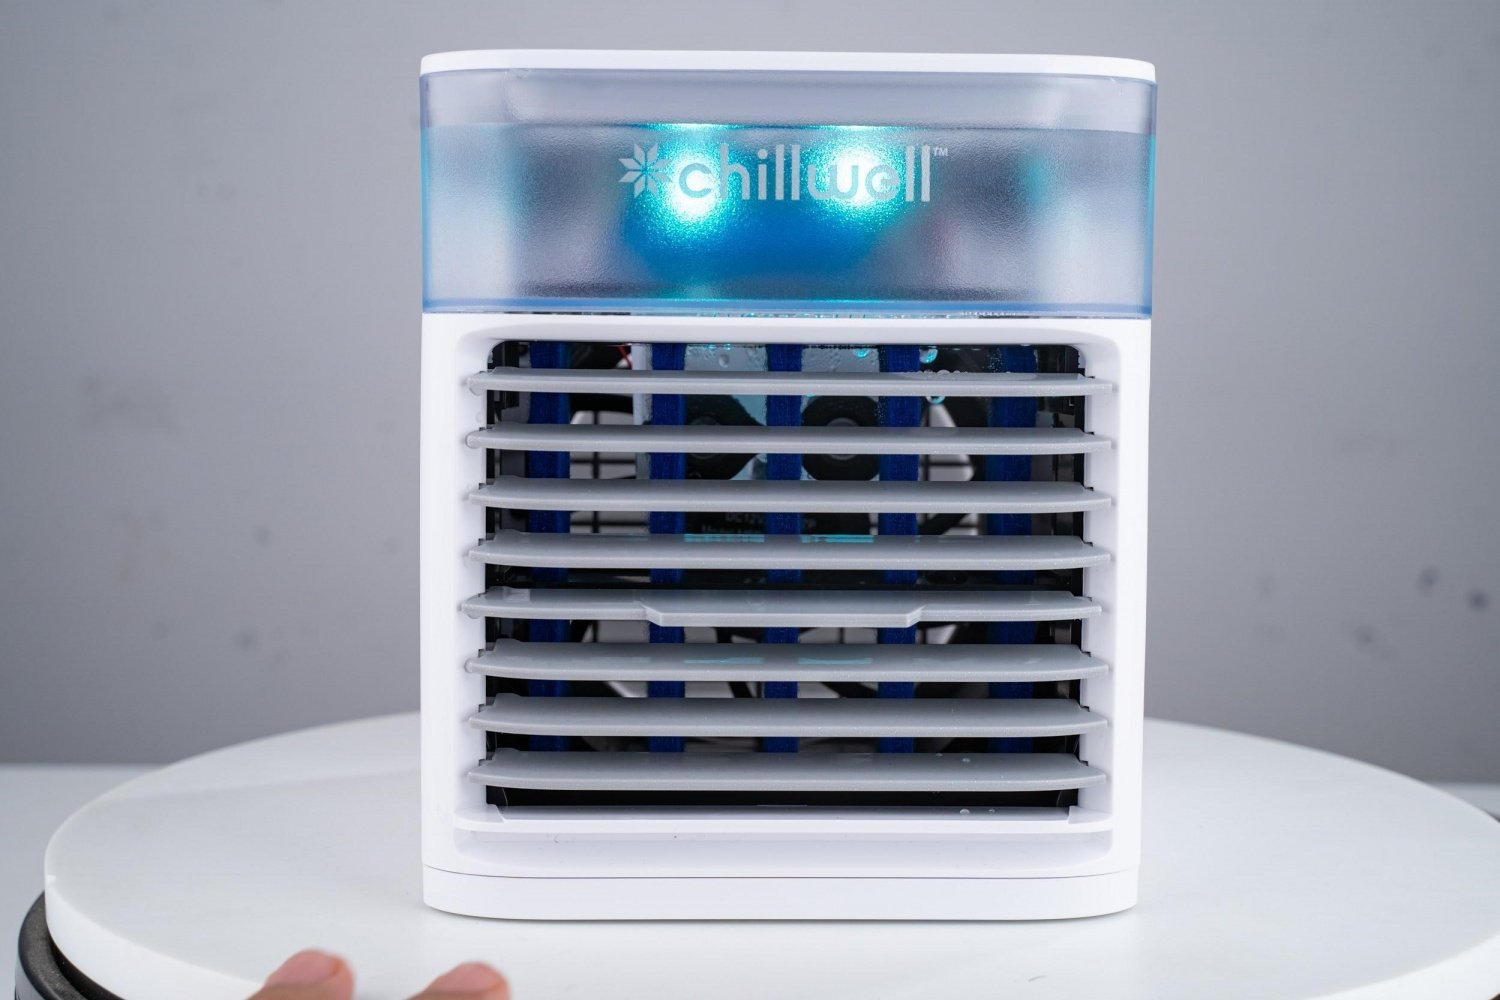 Chillwell 2.0 Portable Air Conditioner Unit